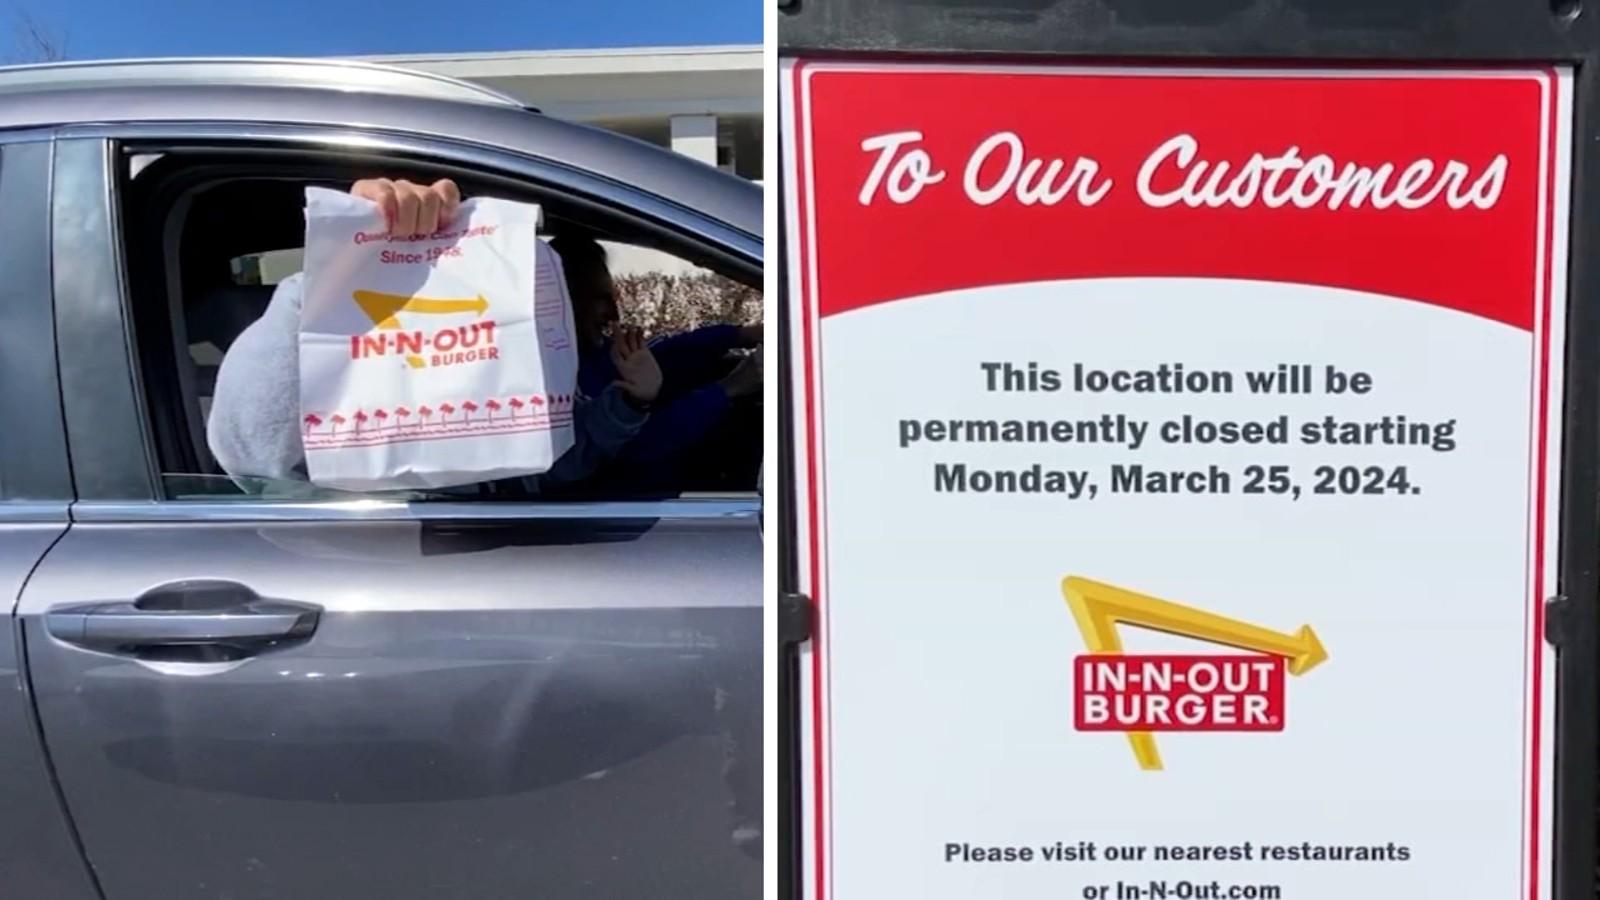 Oakland In-N-Out grills last burgers Sunday, permanently closing: ‘It’s sad’ [Video]